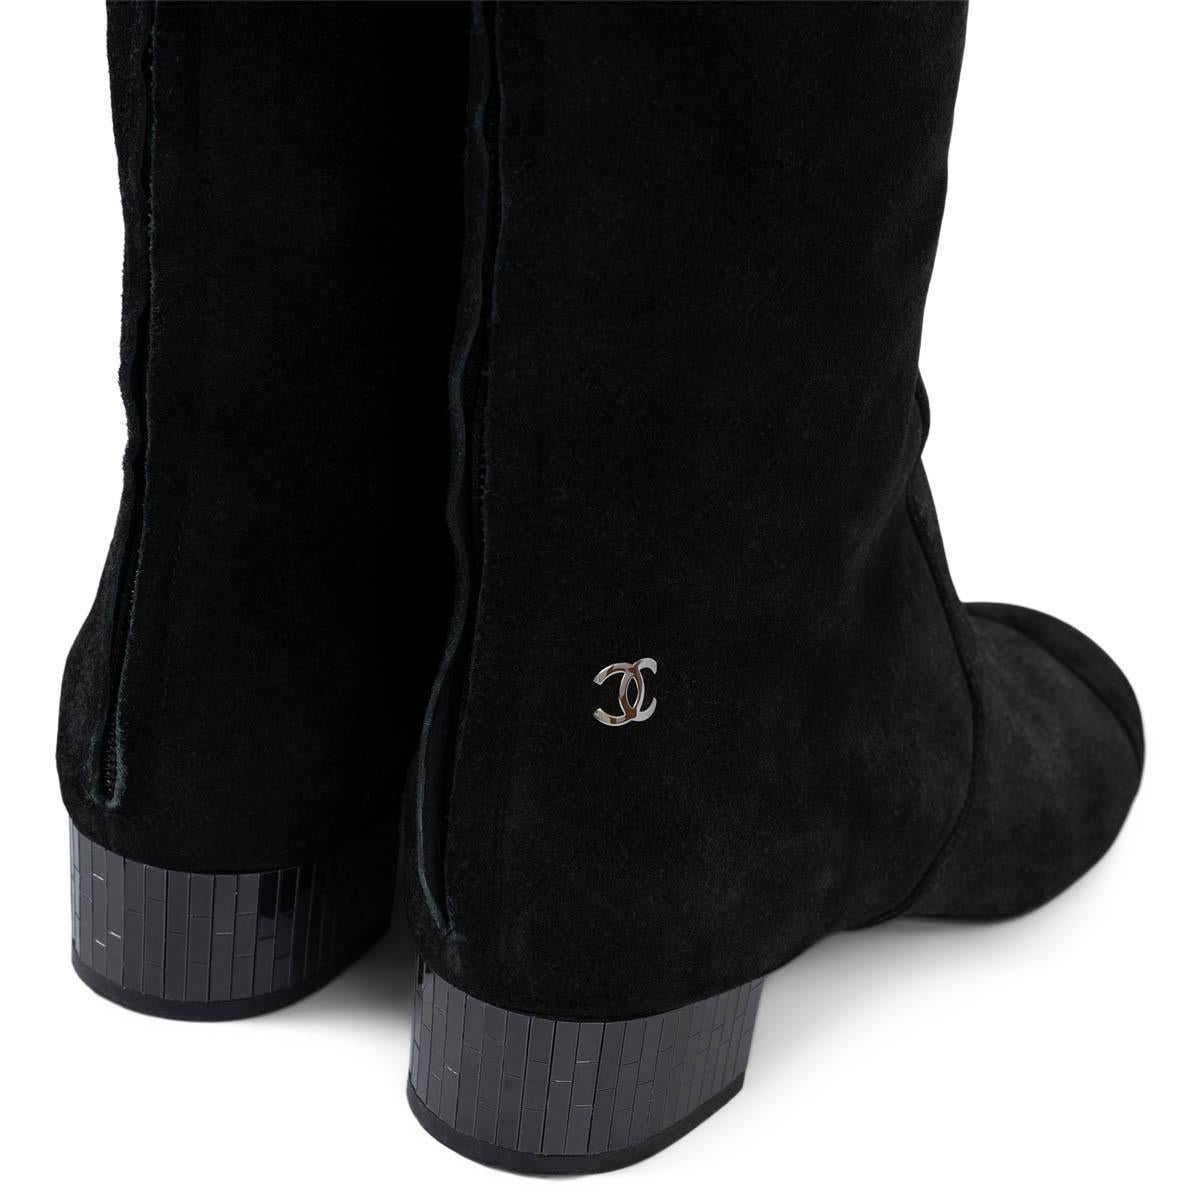 CHANEL black textured suede MIRROR HEEL OVER-KNEE Boots Shoes 39.5 For Sale 3